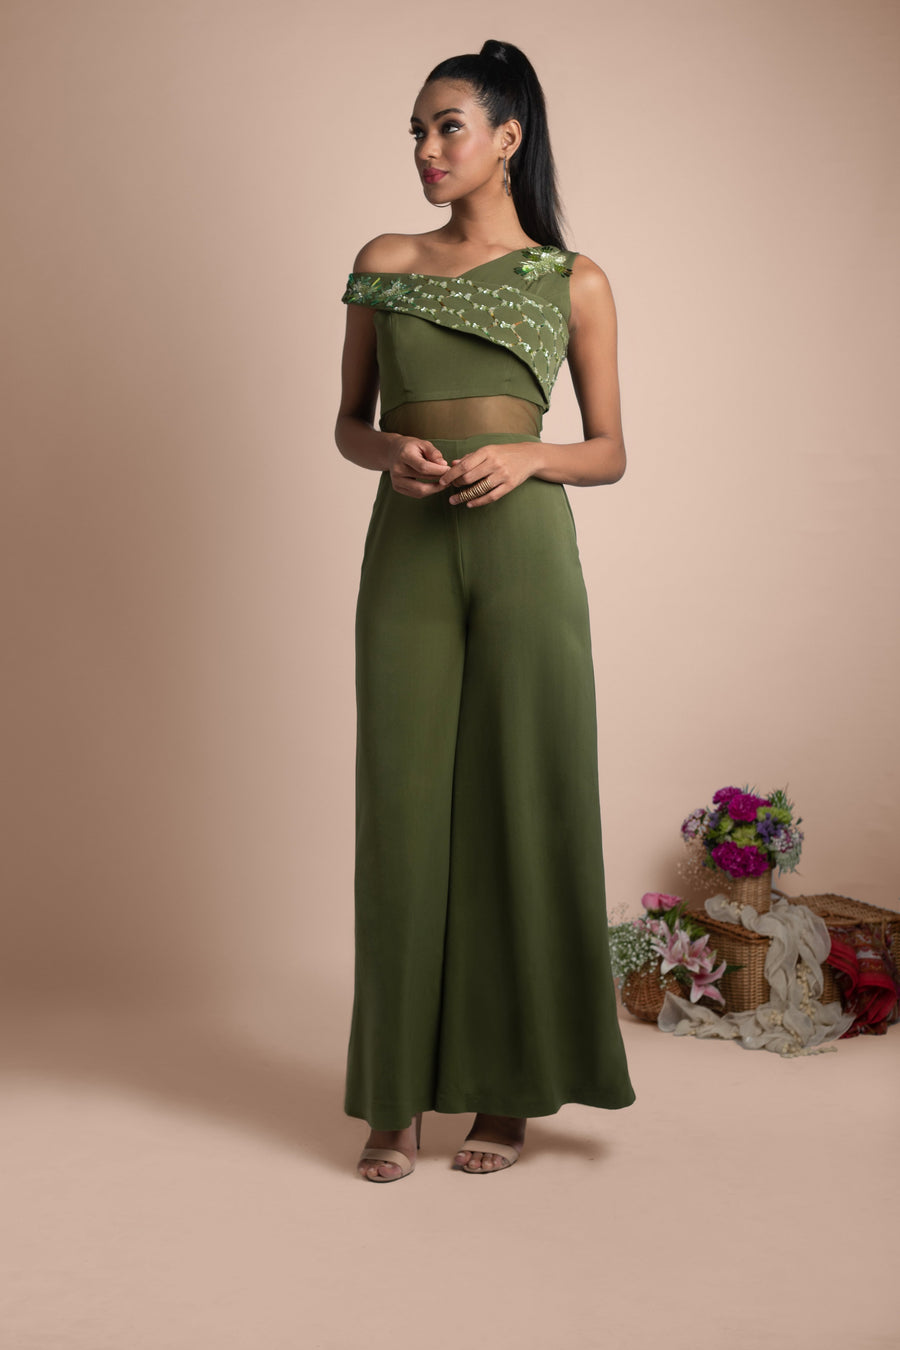 Mehak Murpana | Jumpsuit | Stylish formal and party wear.